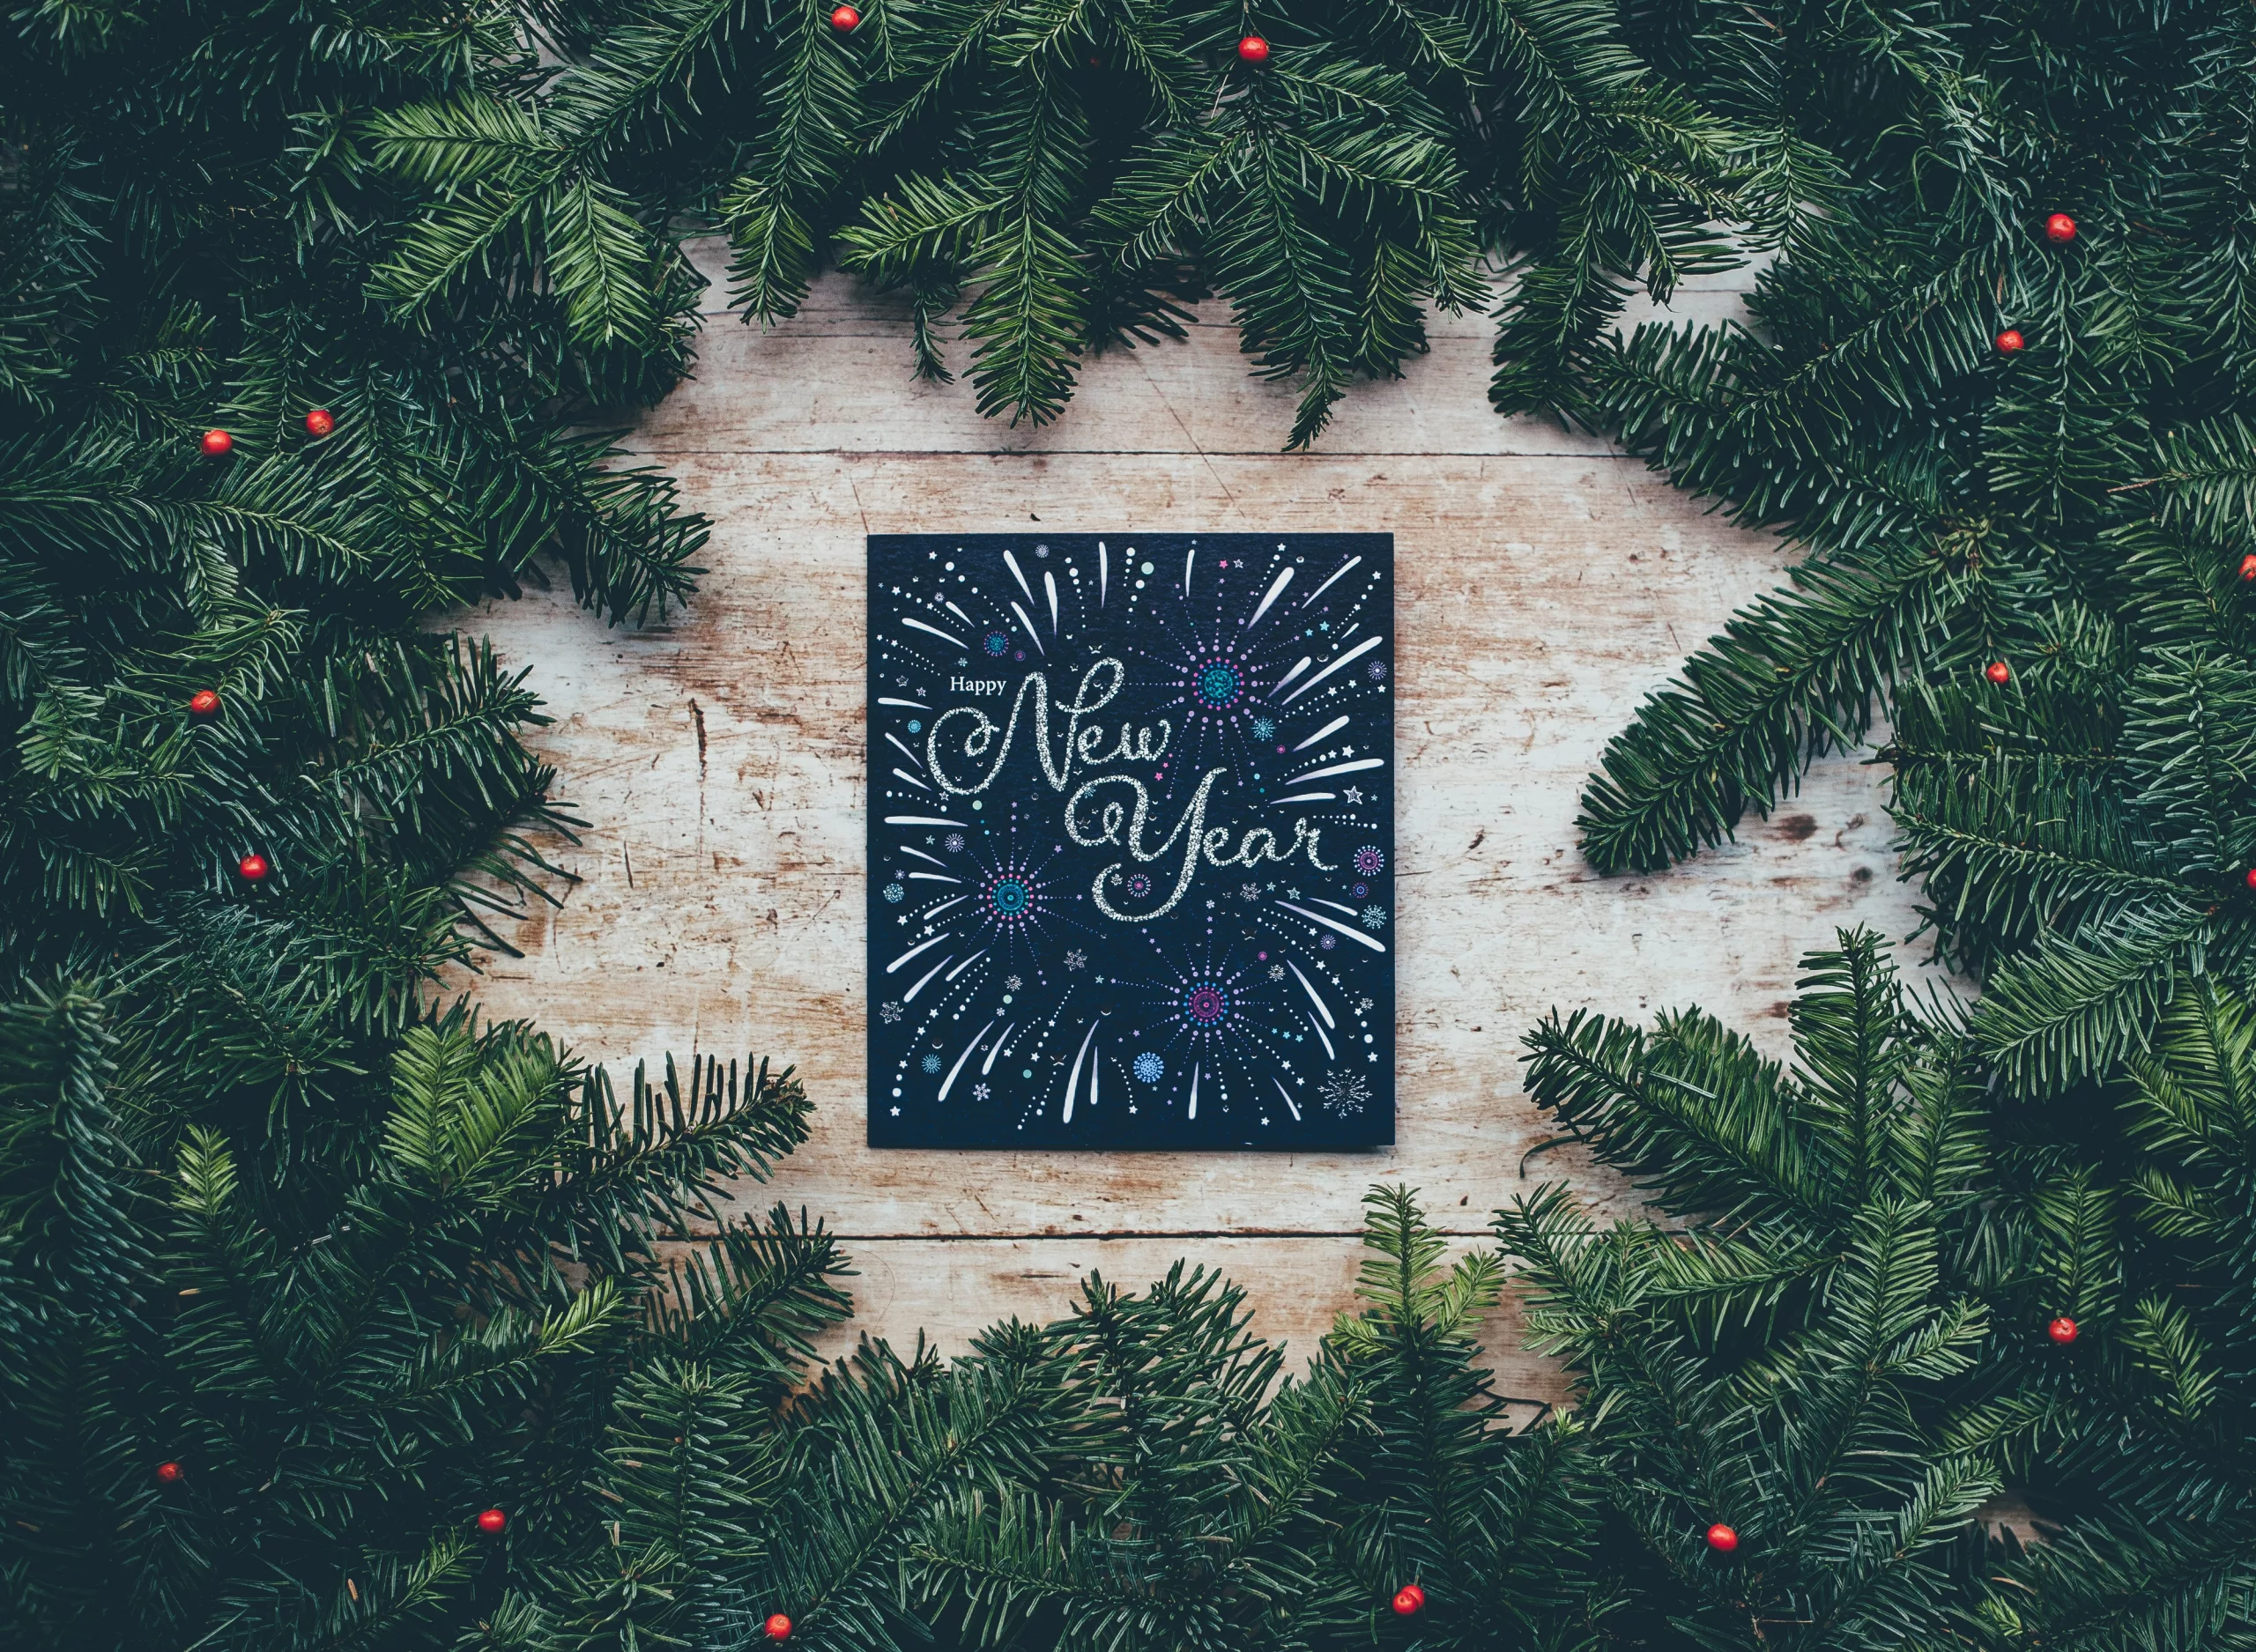 New Year sign surrounded by pine branches